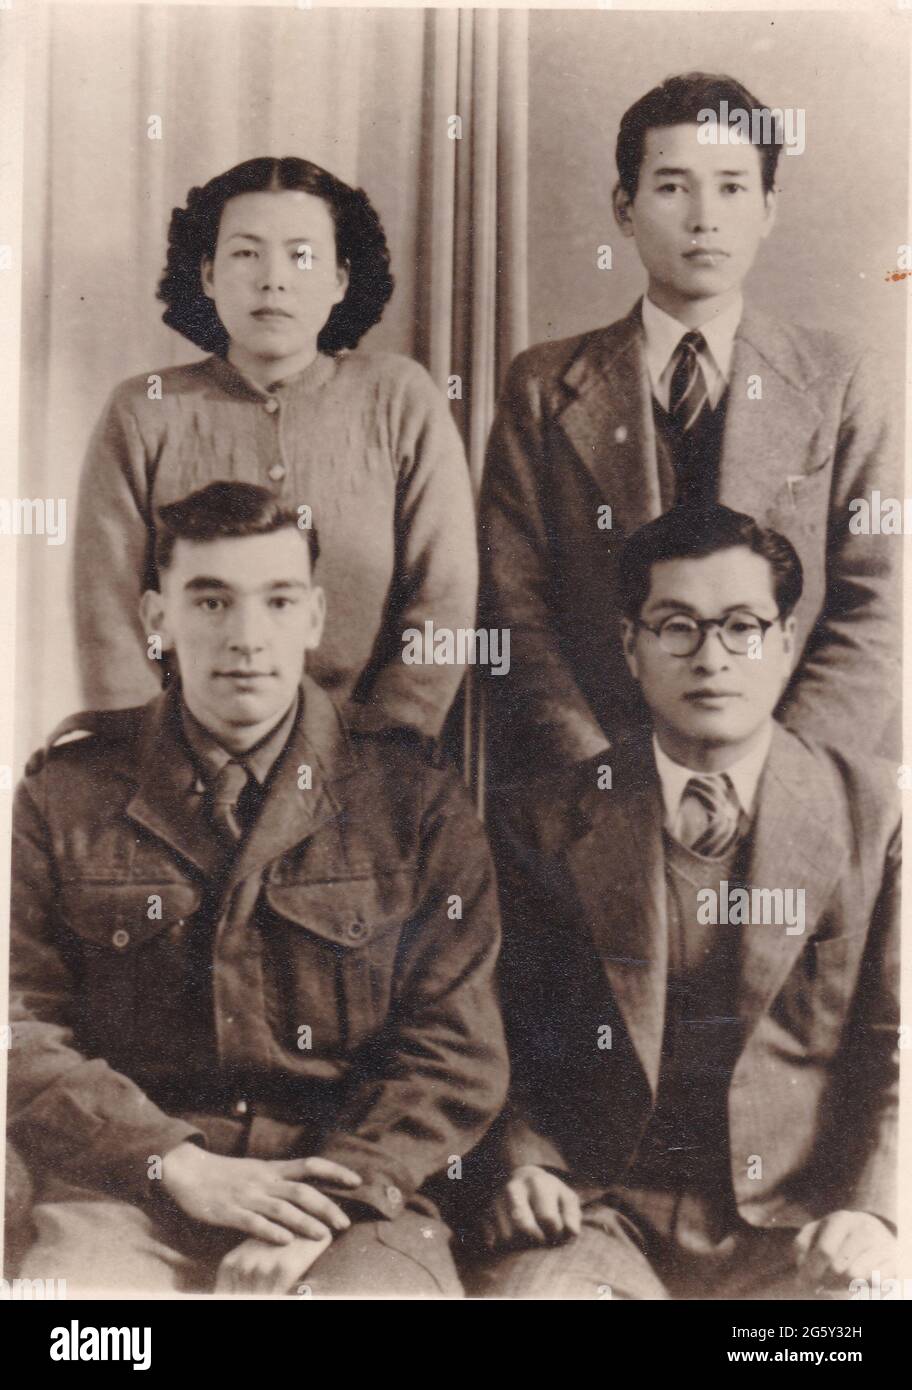 Vintage black and white photo of young people, possibly Oriental  1940s. Stock Photo